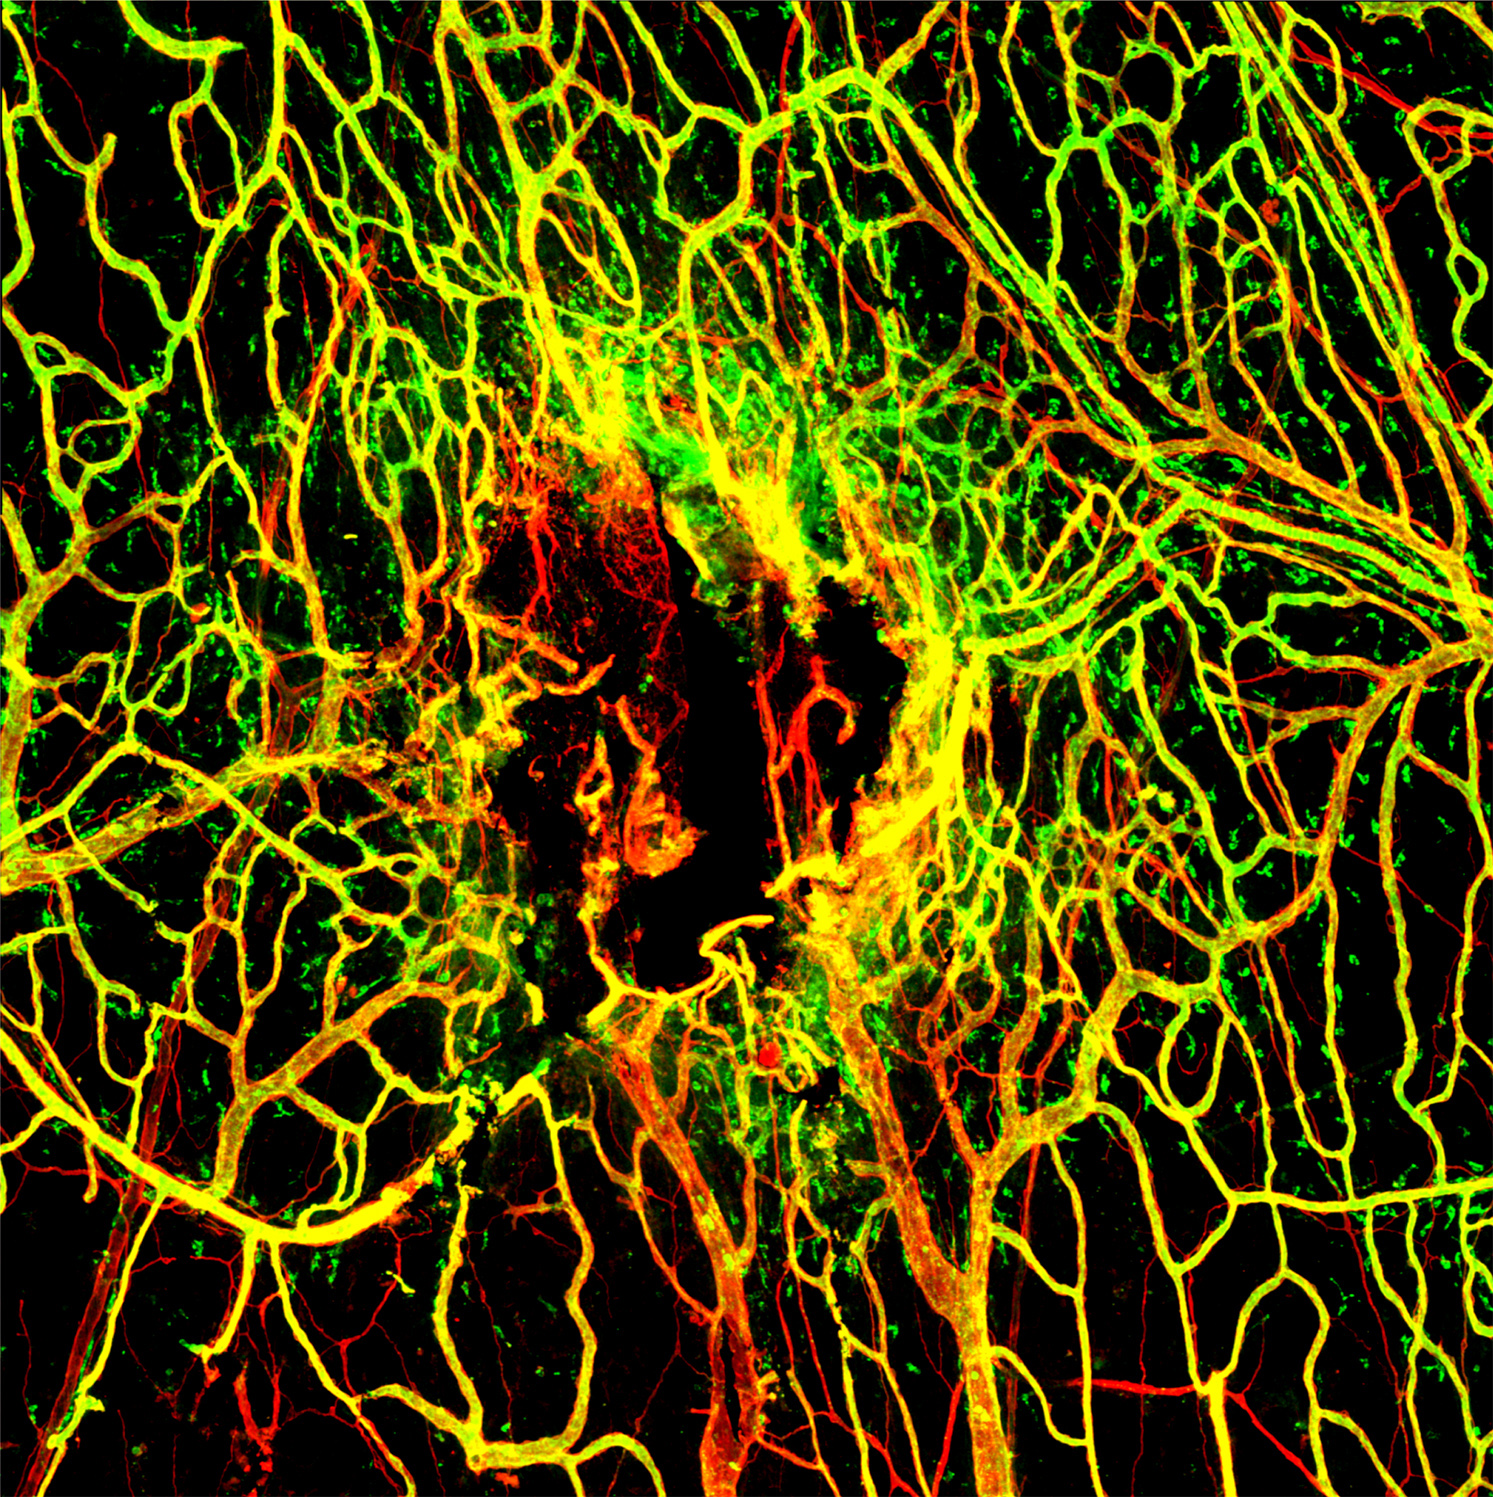 Viral Infection Slows Blood Vessel Repair After TBI: Seven days after mTBI, the blood vessels (stained in red) in the tissues around the brain are not completely repaired. A marker for intact vessels was used (labeled in green) to distinguish fully functi